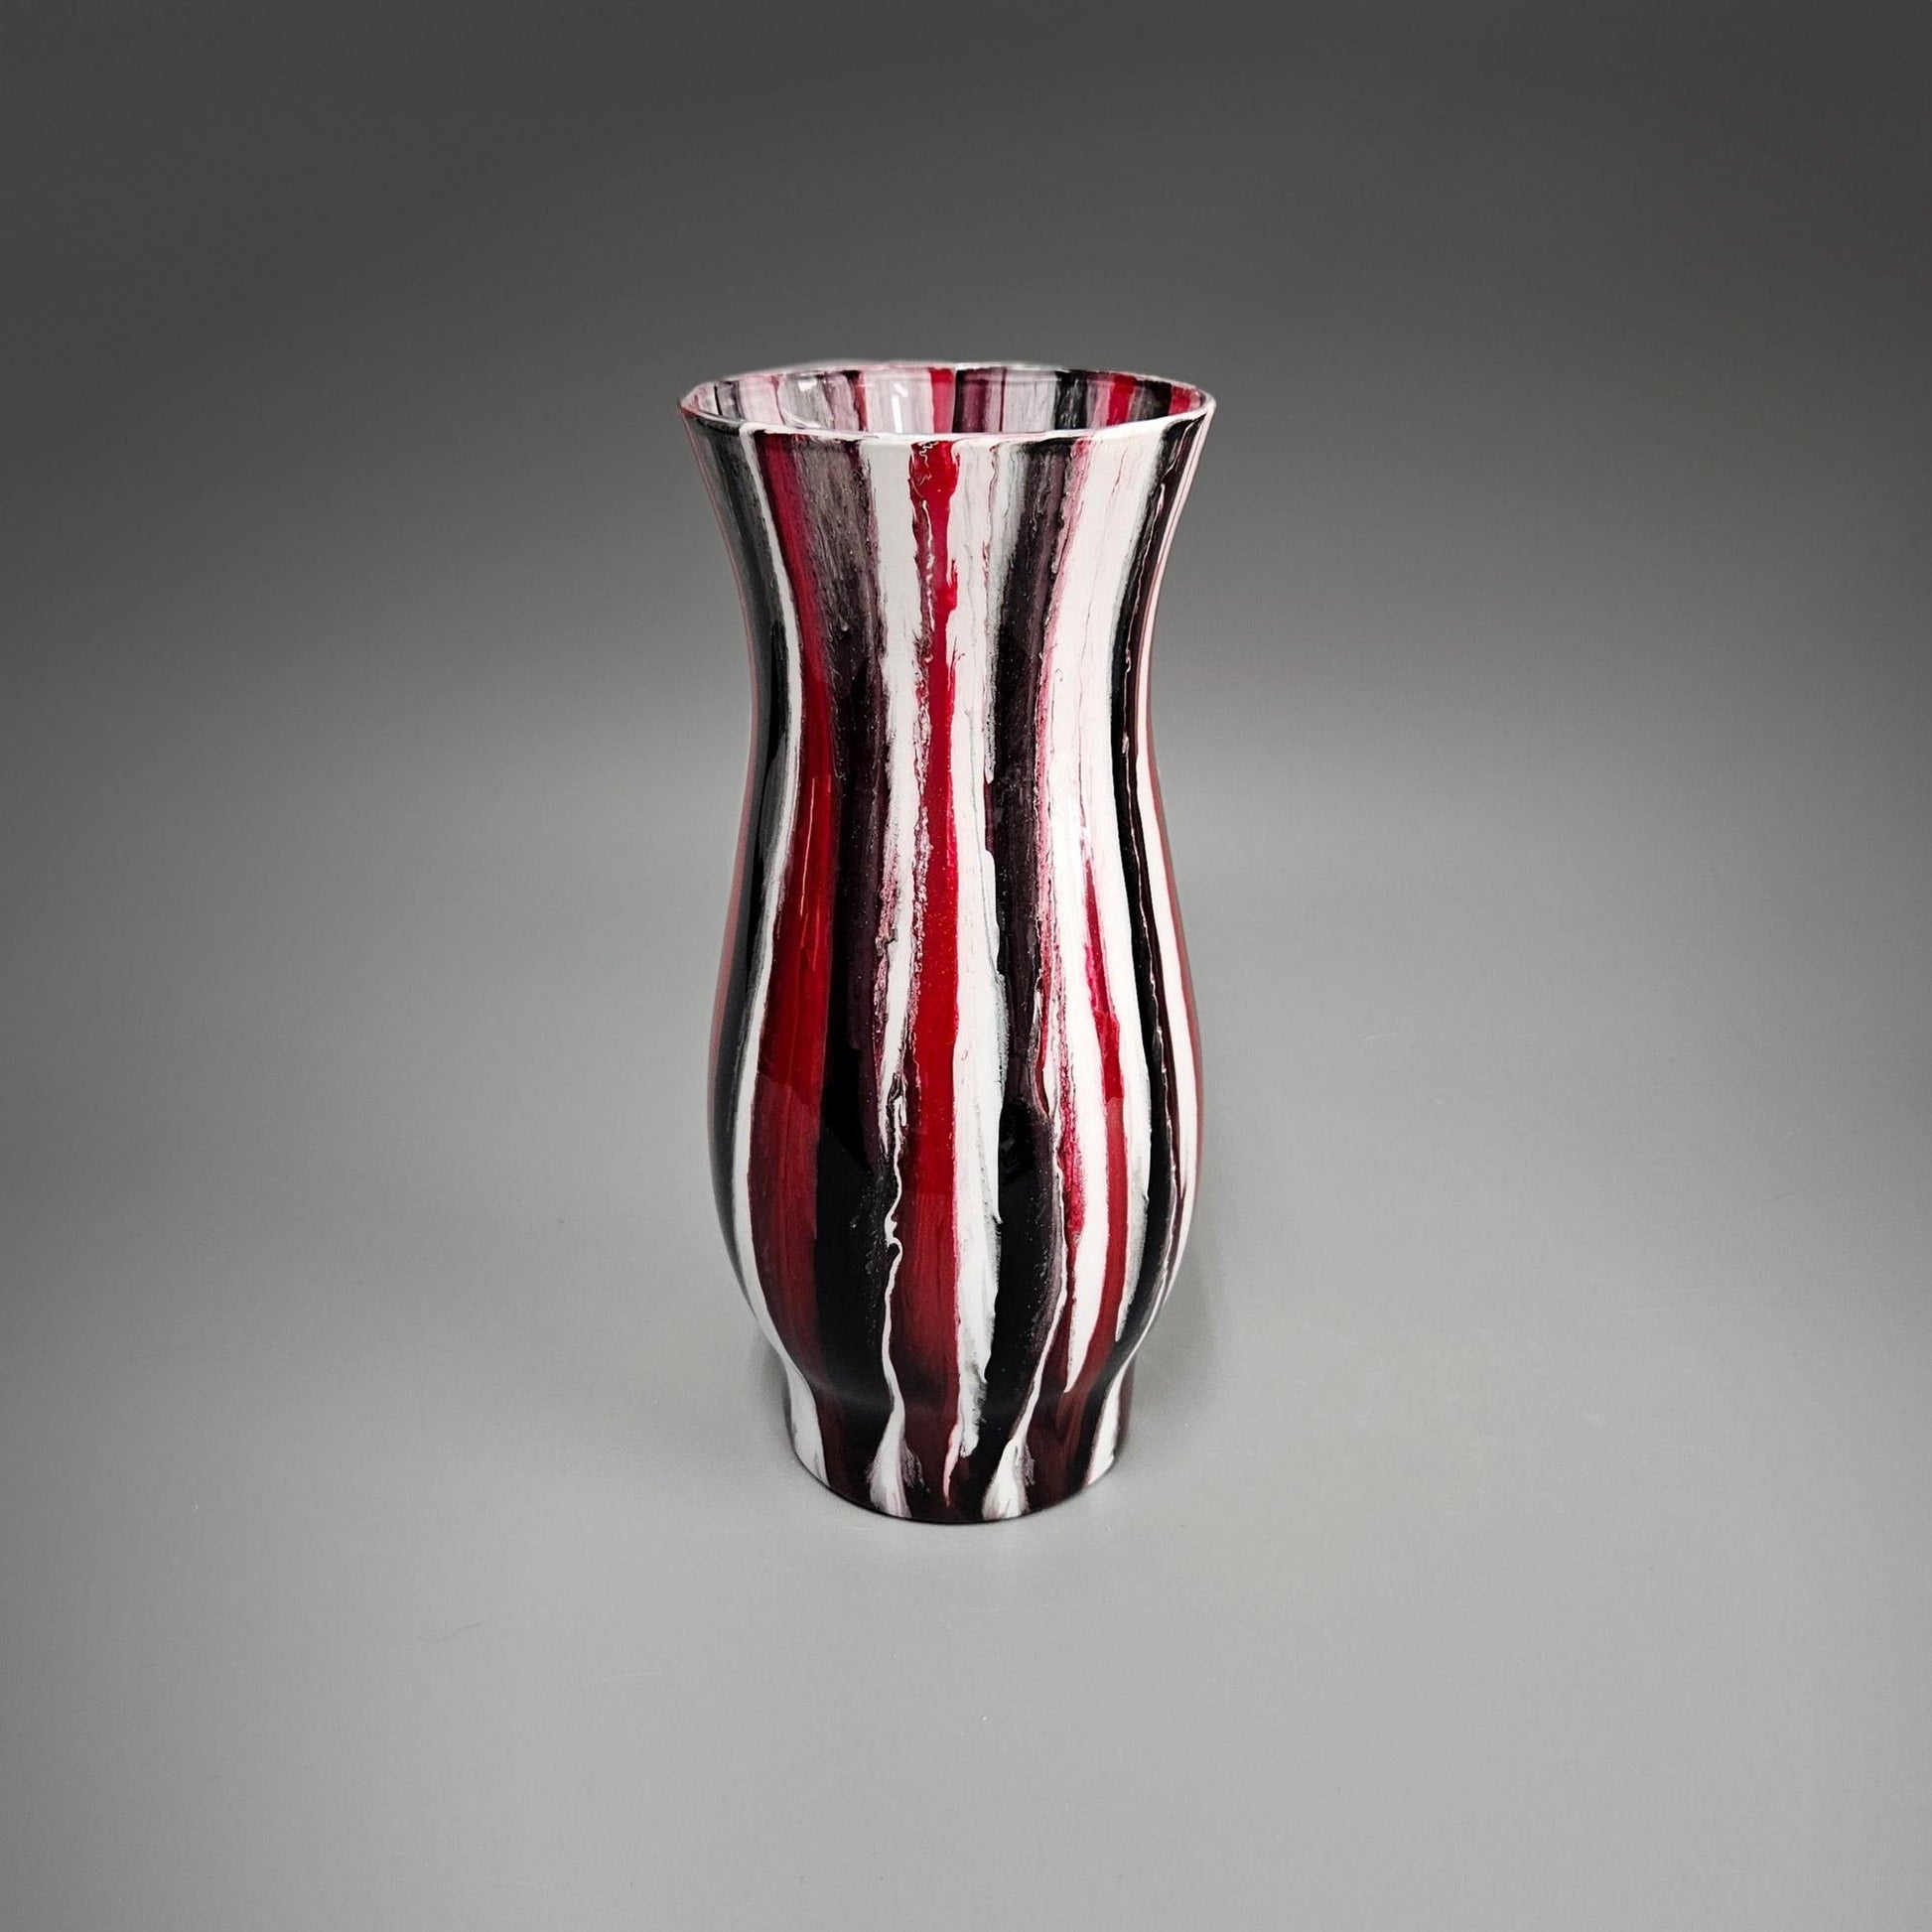 Glass Art Painted Vase in Red Black and White | Acrylic Pour Vases